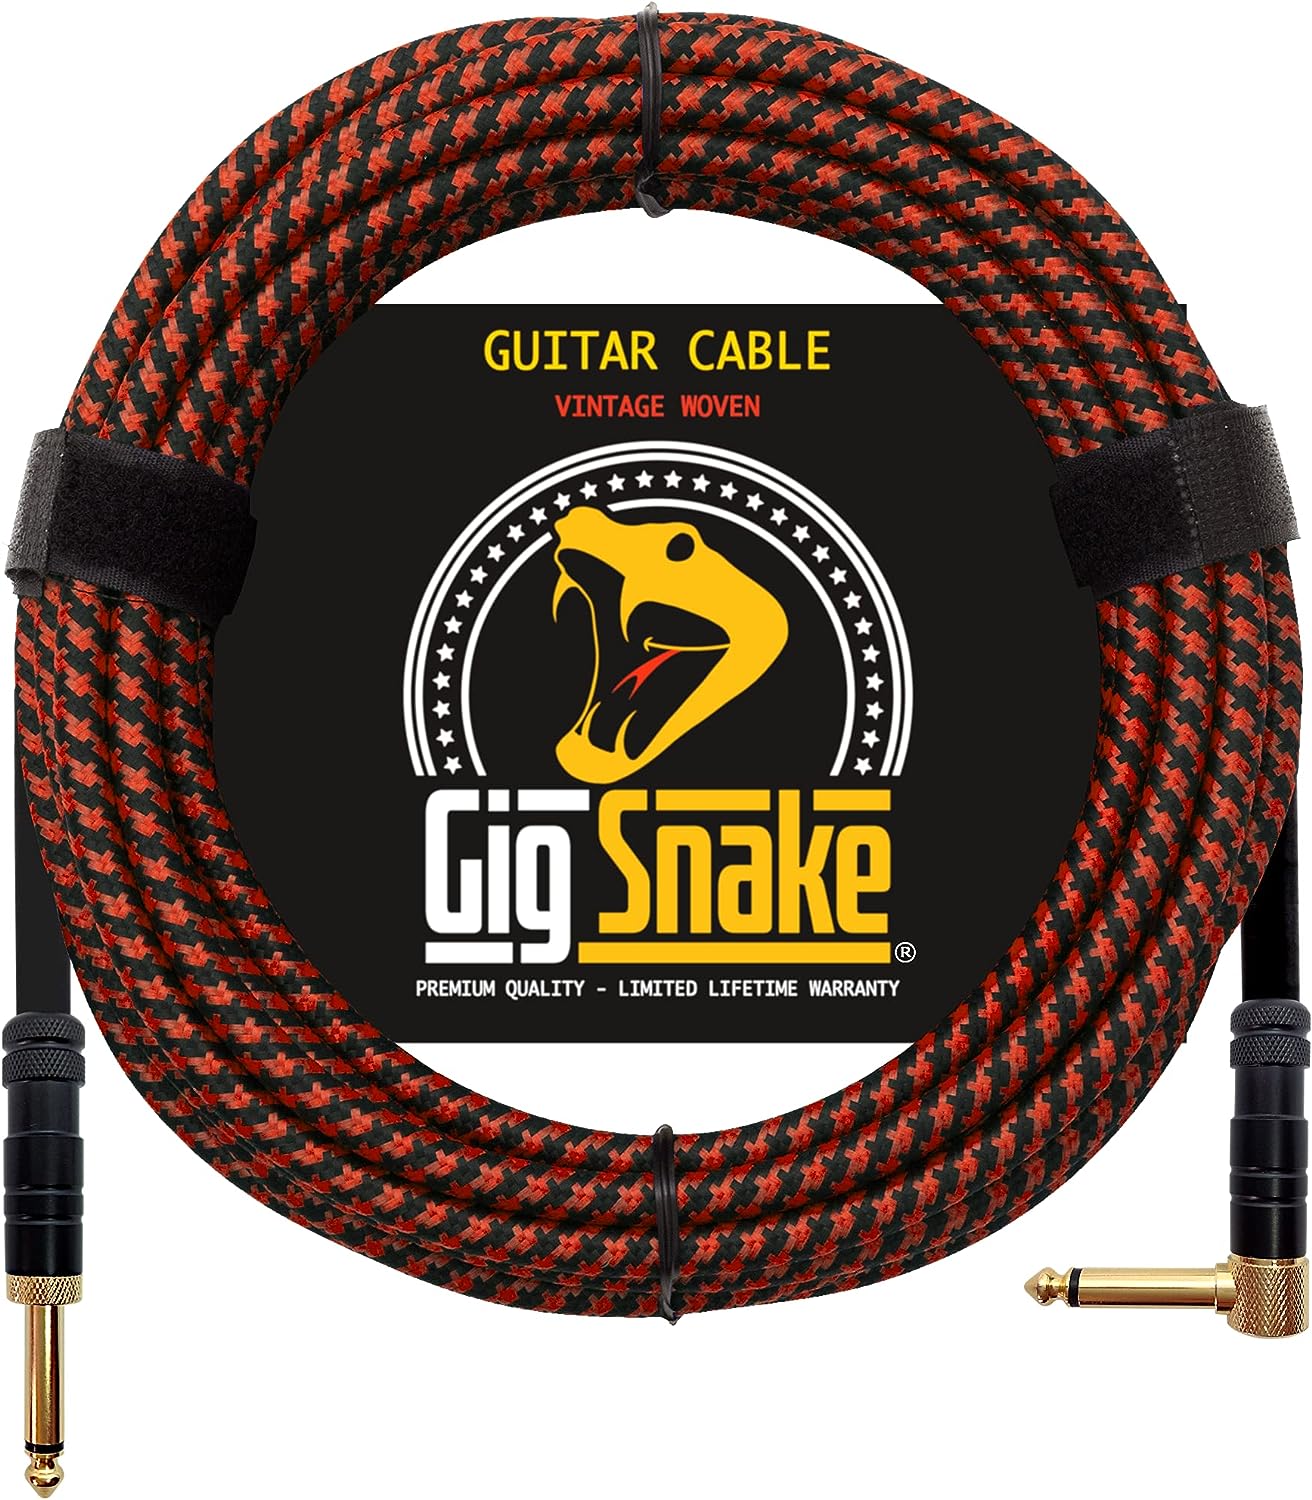 Guitar Cable 20 ft - 1/4 Inch Right Angle Red [...]